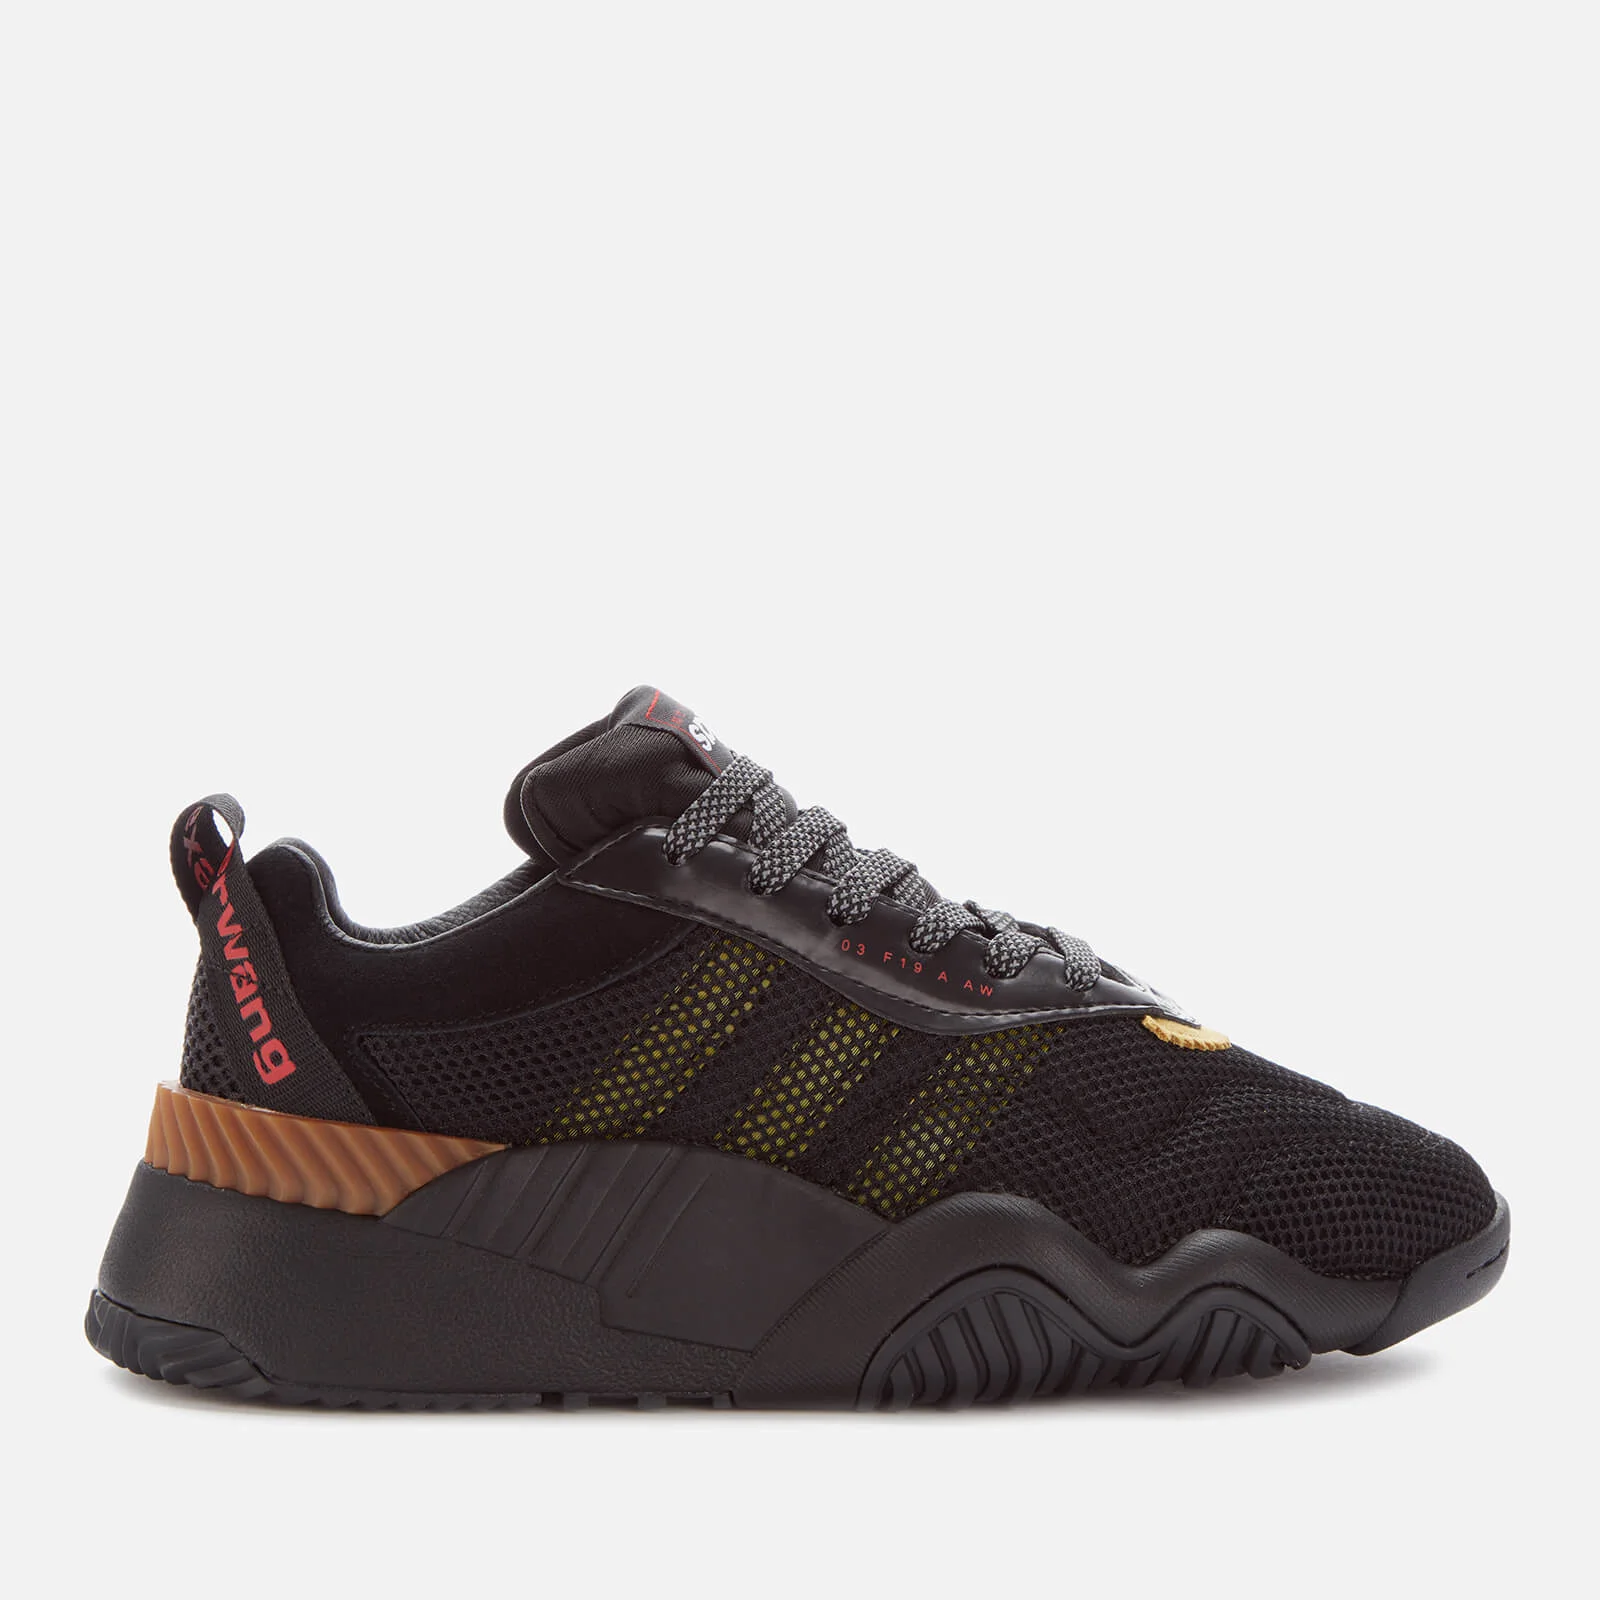 adidas Originals by Alexander Wang Turnout Trainers - Core Black/Yellow Image 1